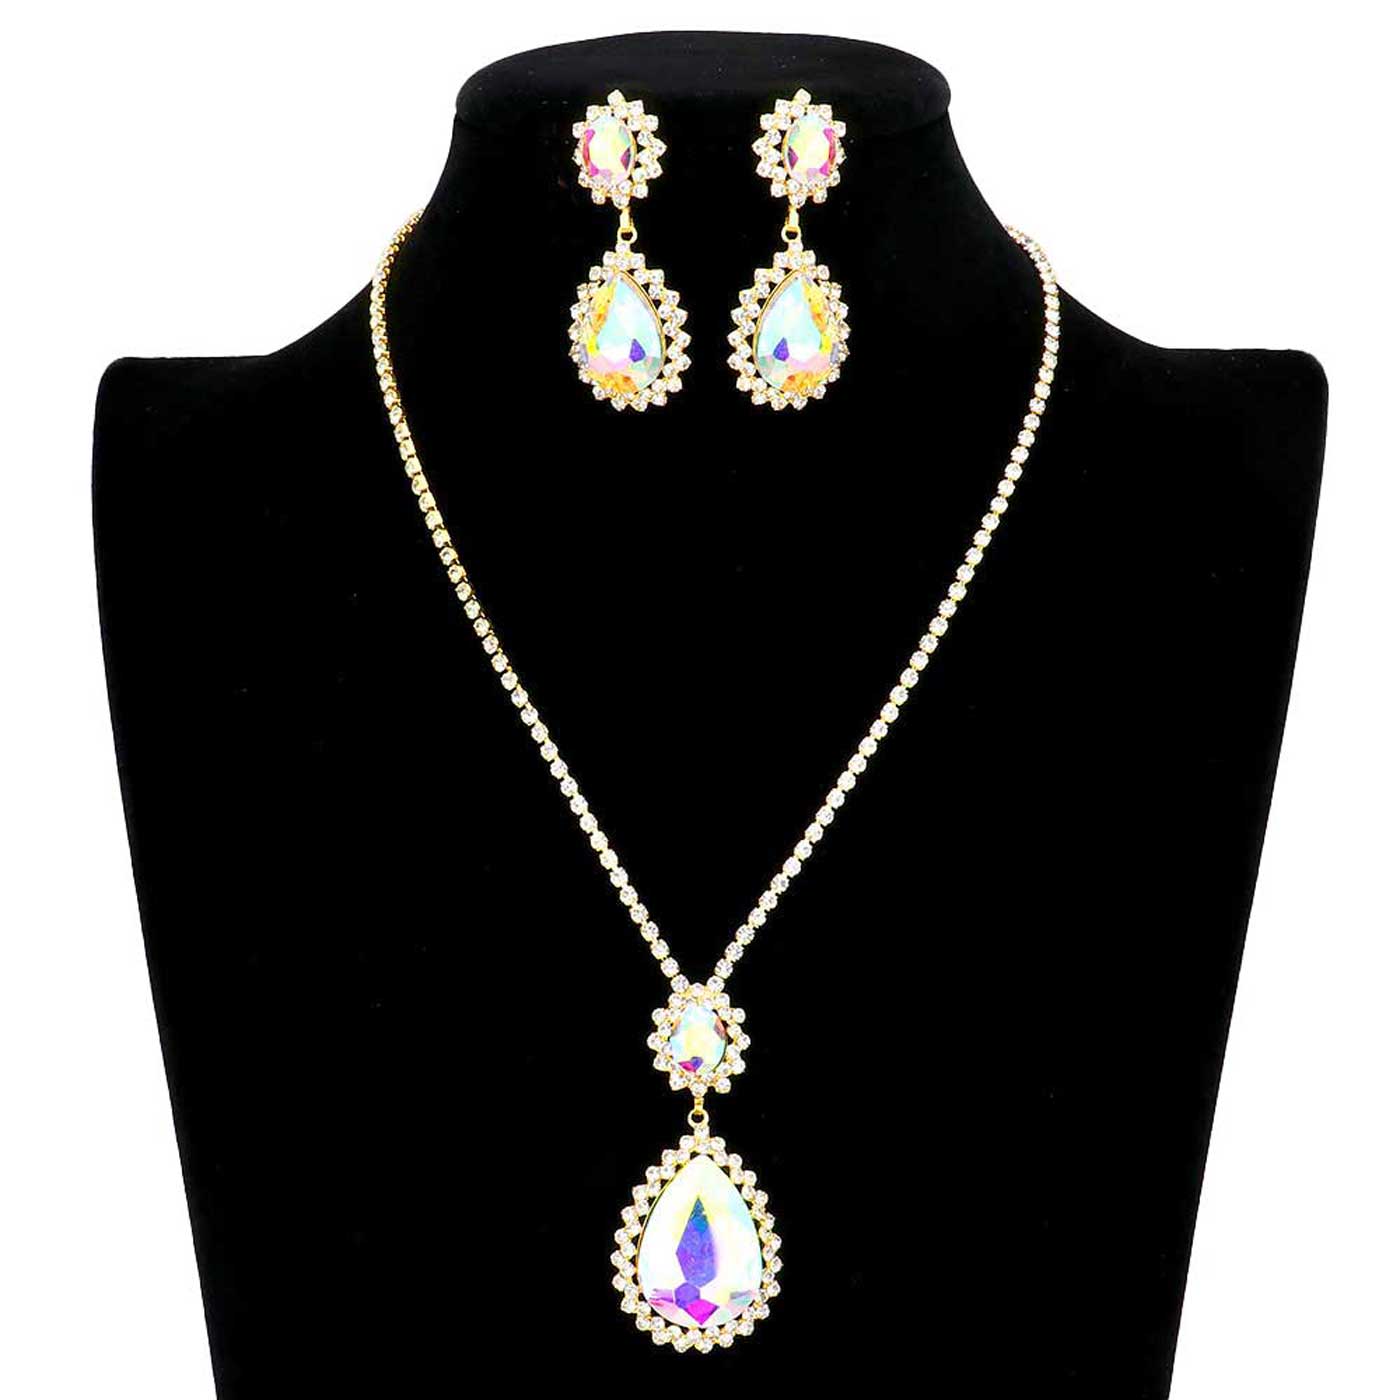 AB Gold Teardrop Accented Rhinestone Necklace. These gorgeous rhinestone pieces will show your class in any special occasion. The elegance of these rhinestone goes unmatched, great for wearing at a party! Perfect jewelry to enhance your look. Awesome gift for birthday, Anniversary, Valentine’s Day or any special occasion.